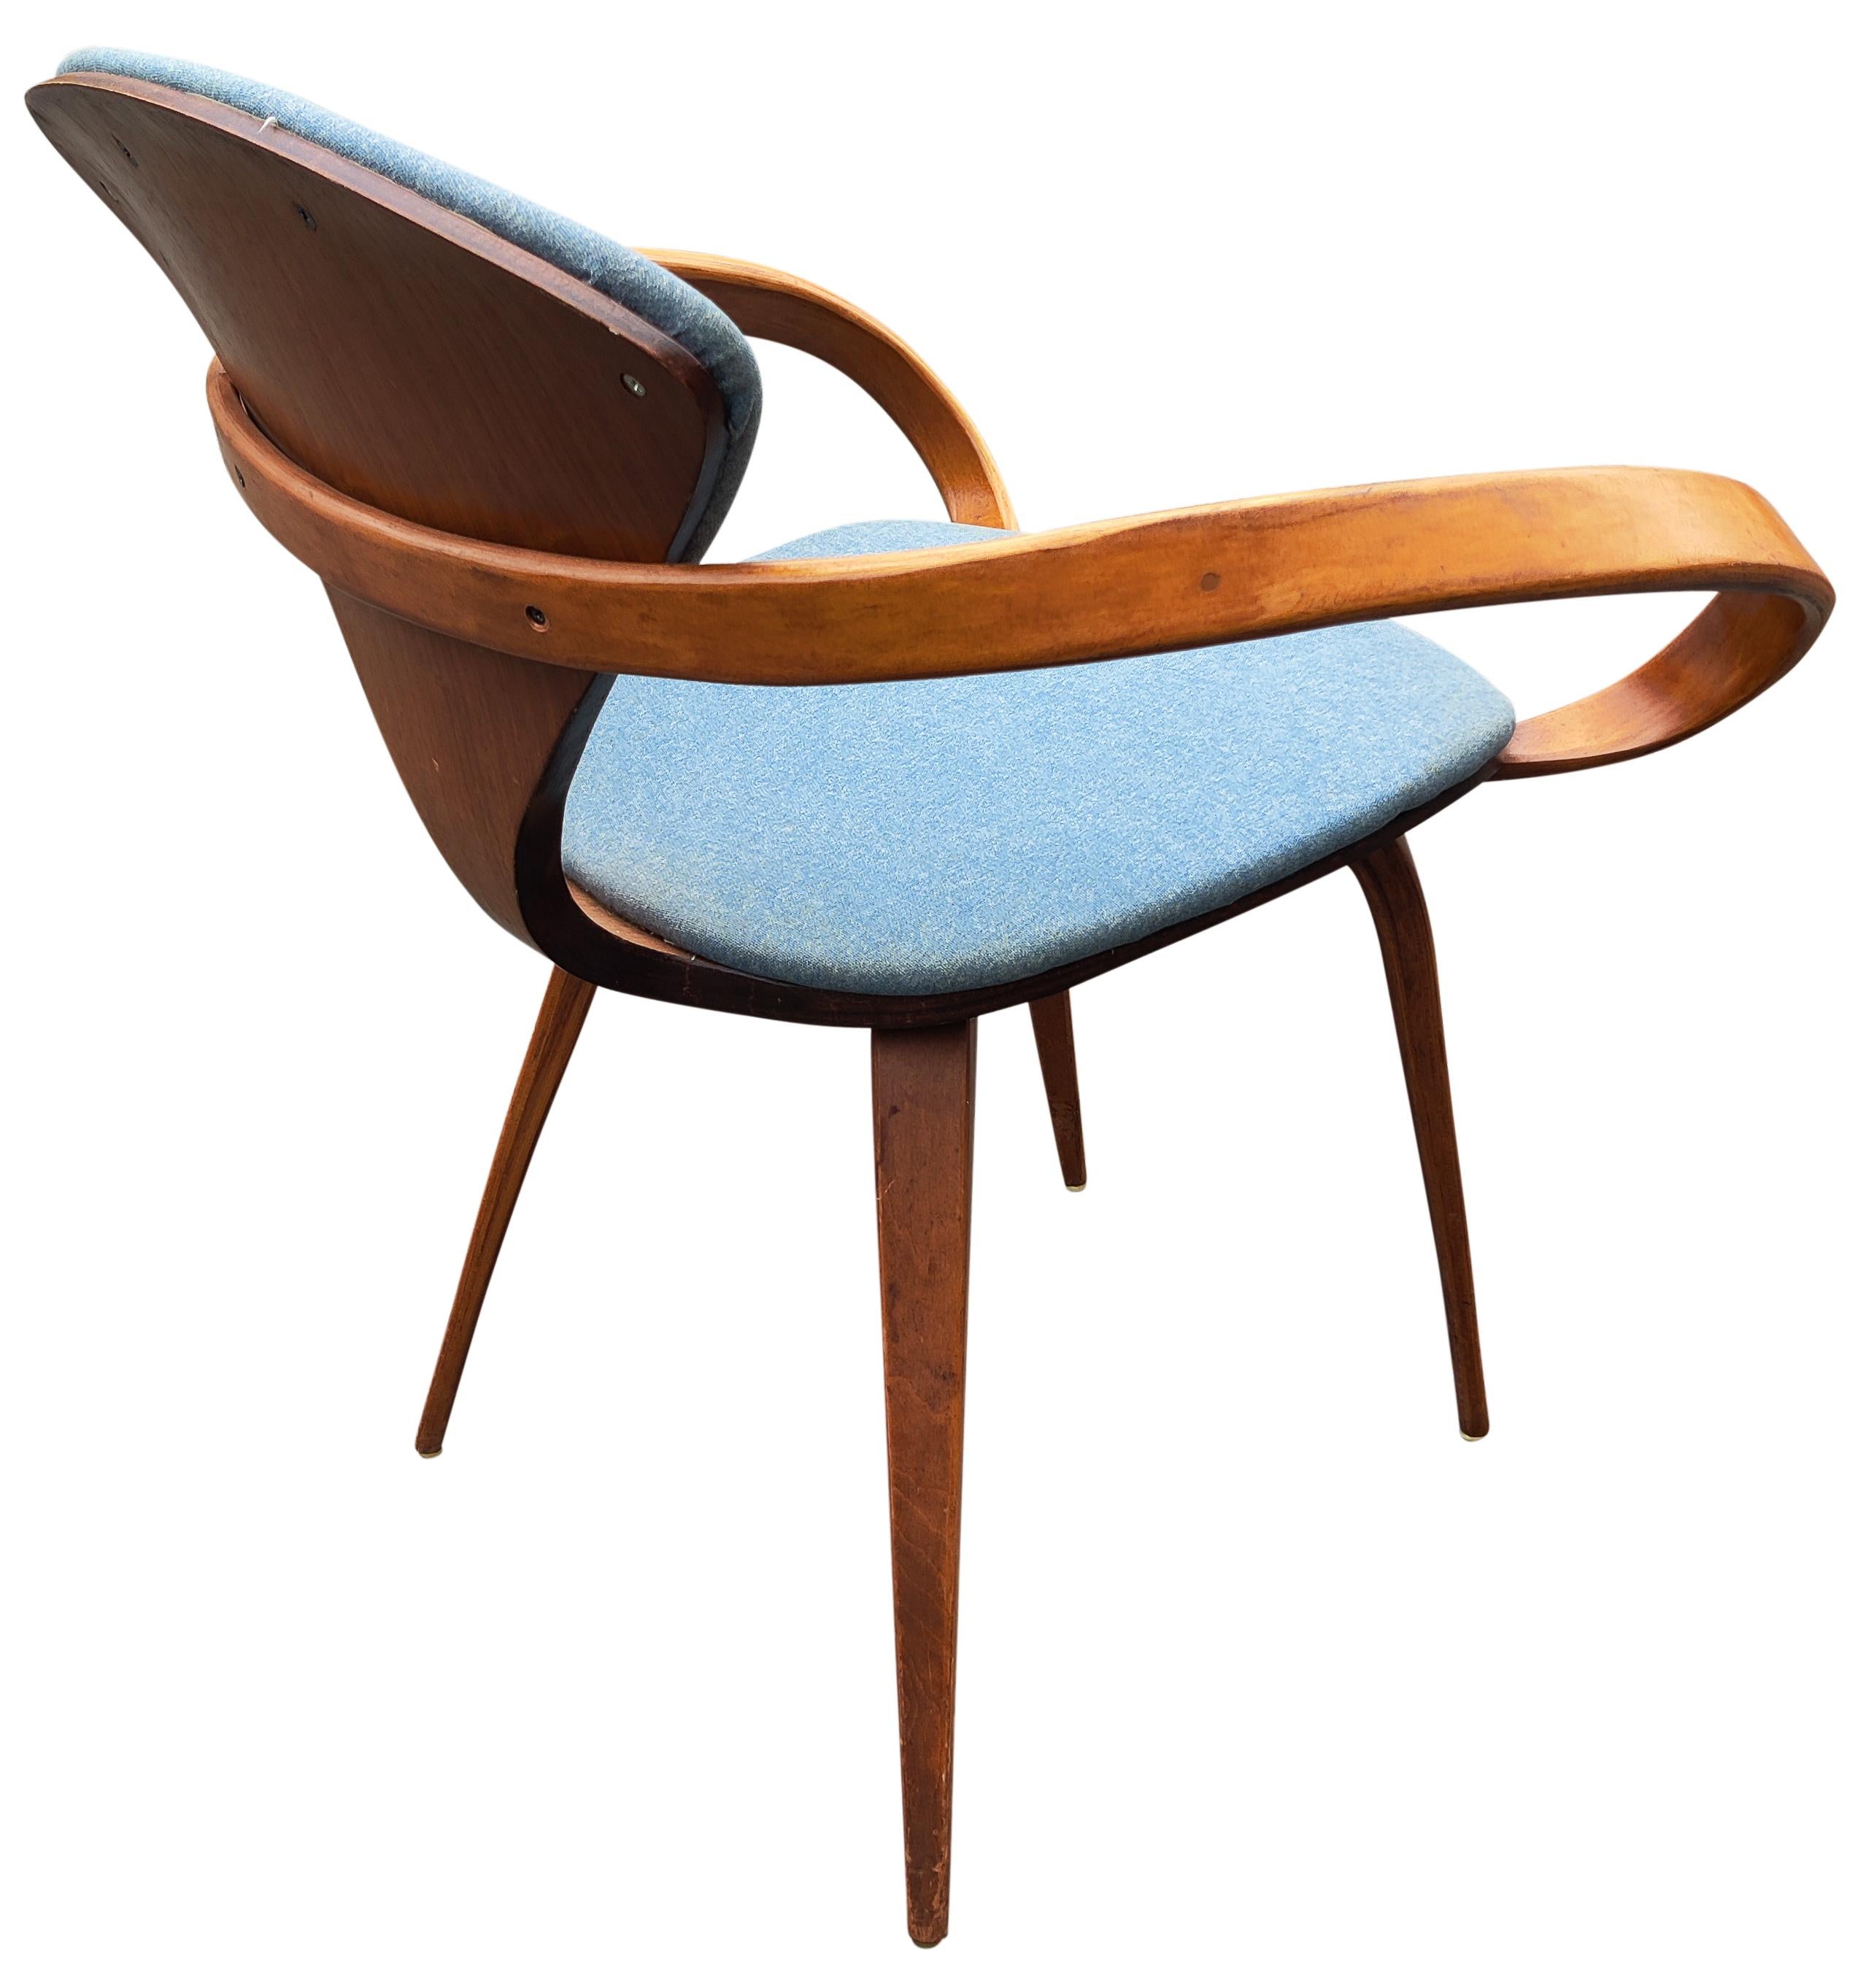 Mid-20th Century Norman Cherner Pretzel Armchair for Plycraft Walnut Upholstery 1960s MCM Classic